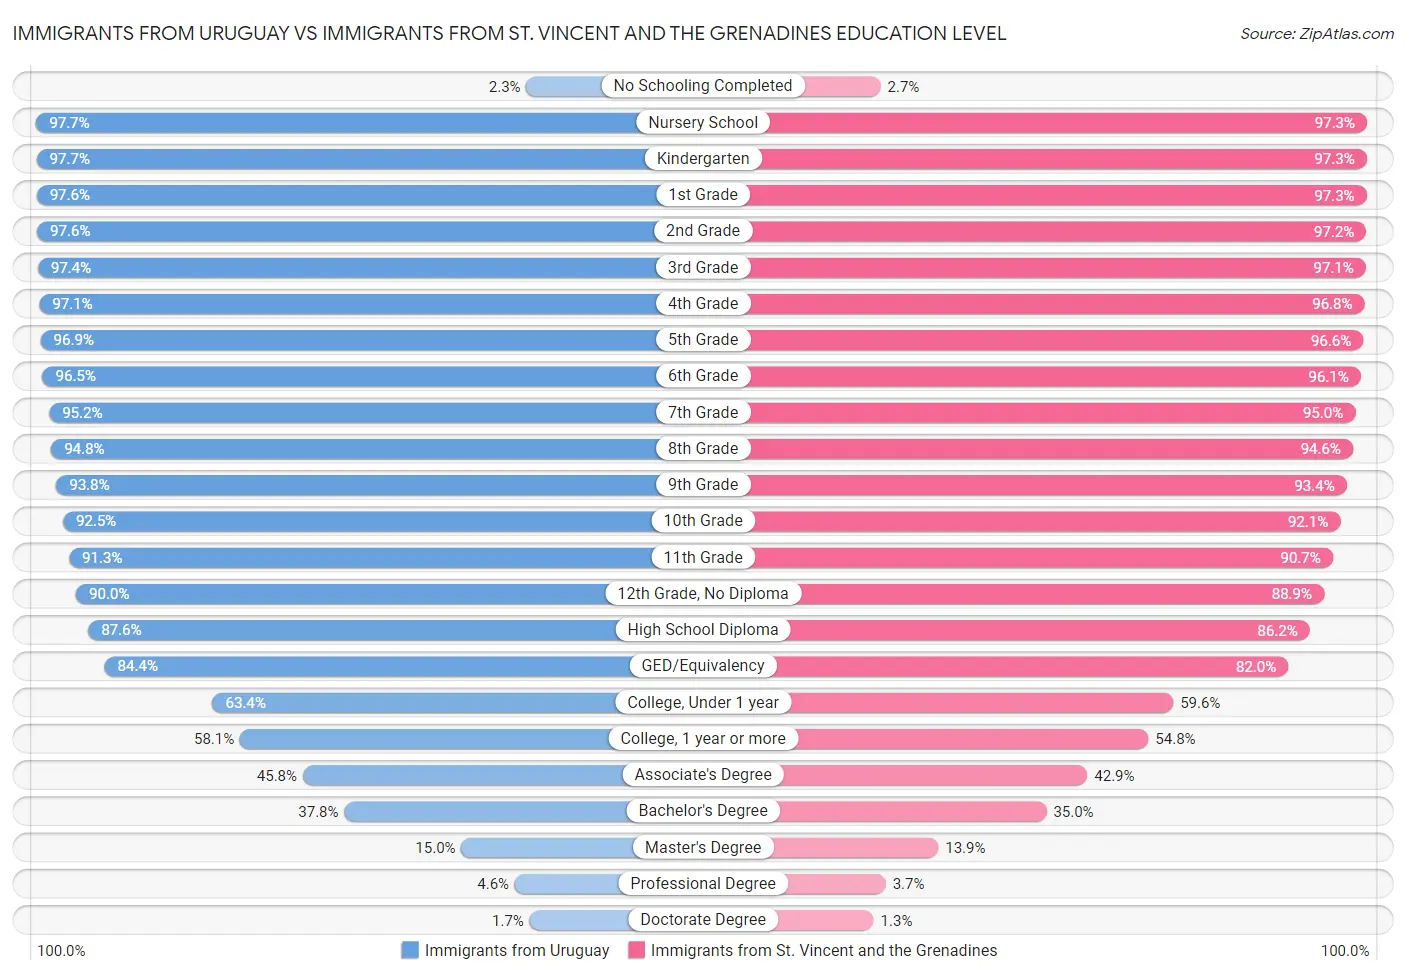 Immigrants from Uruguay vs Immigrants from St. Vincent and the Grenadines Education Level